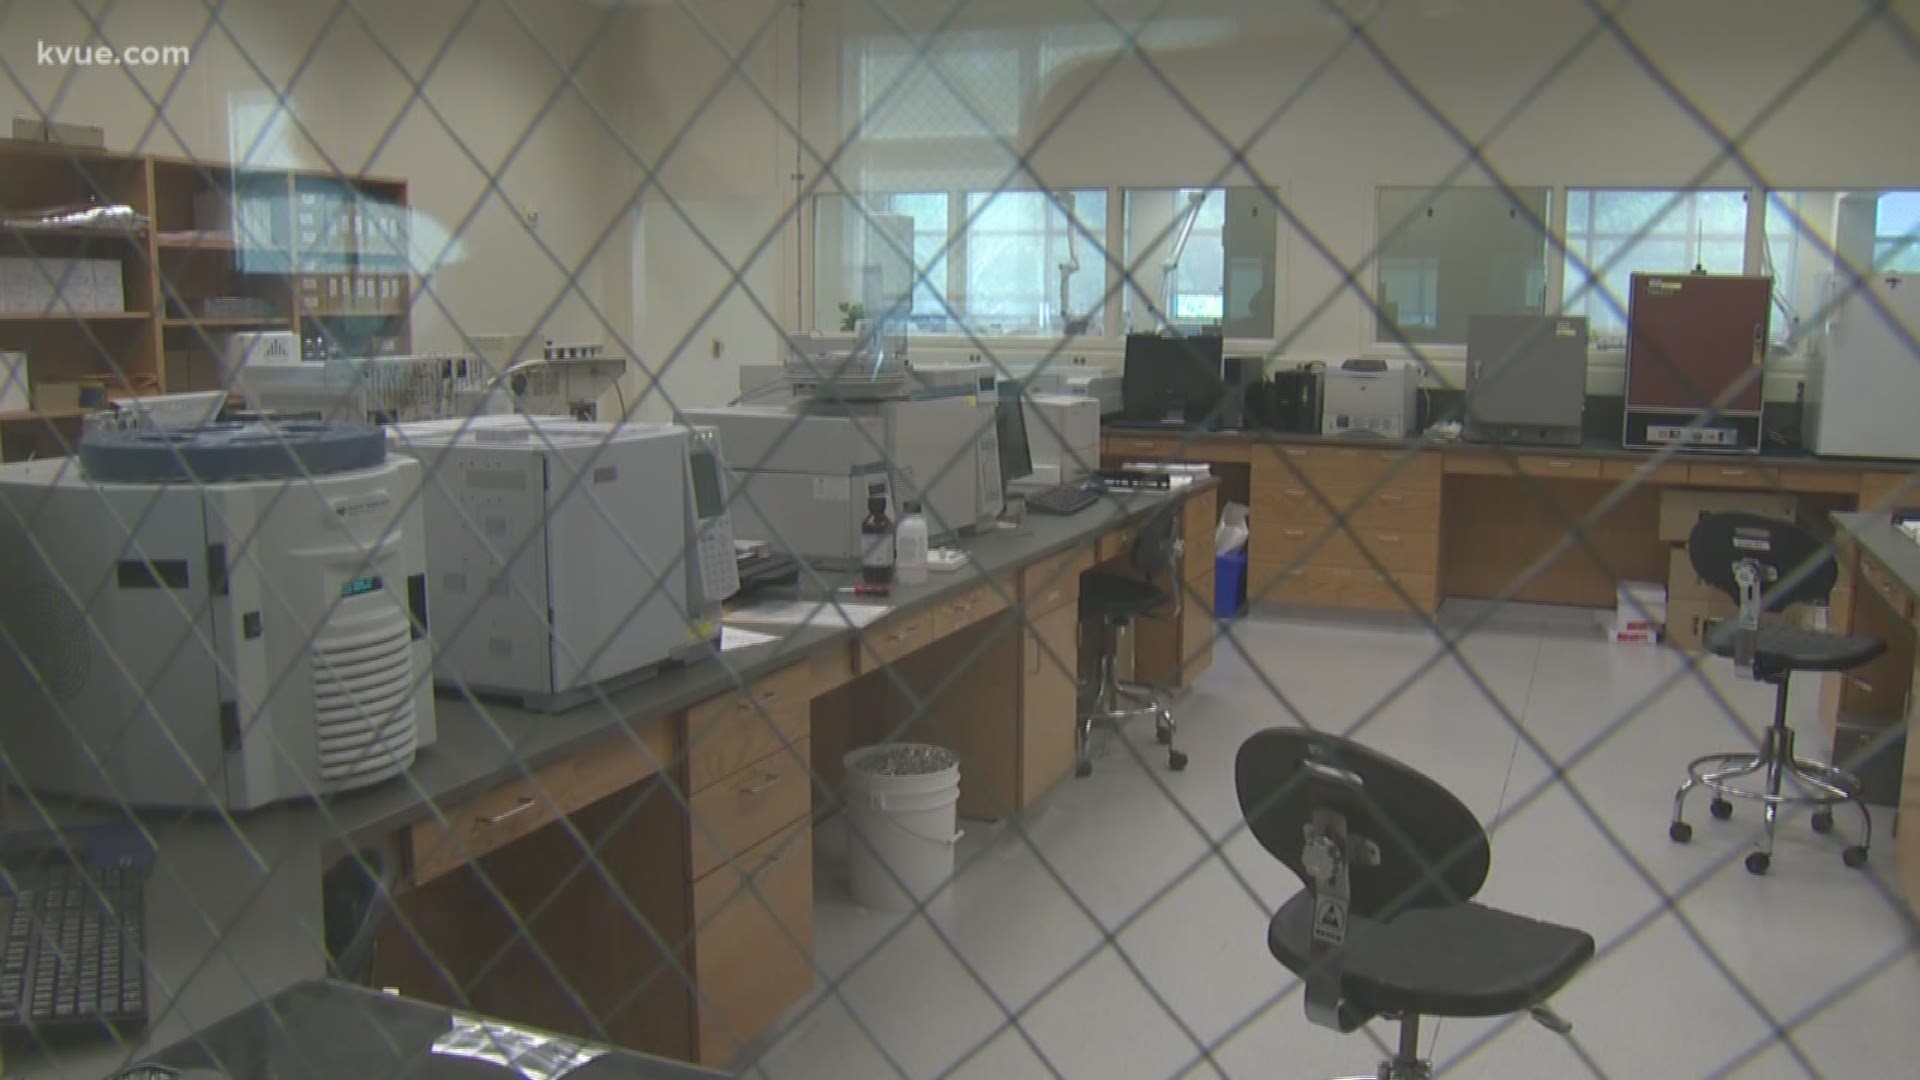 Austin police DNA lab: Cases could return to court